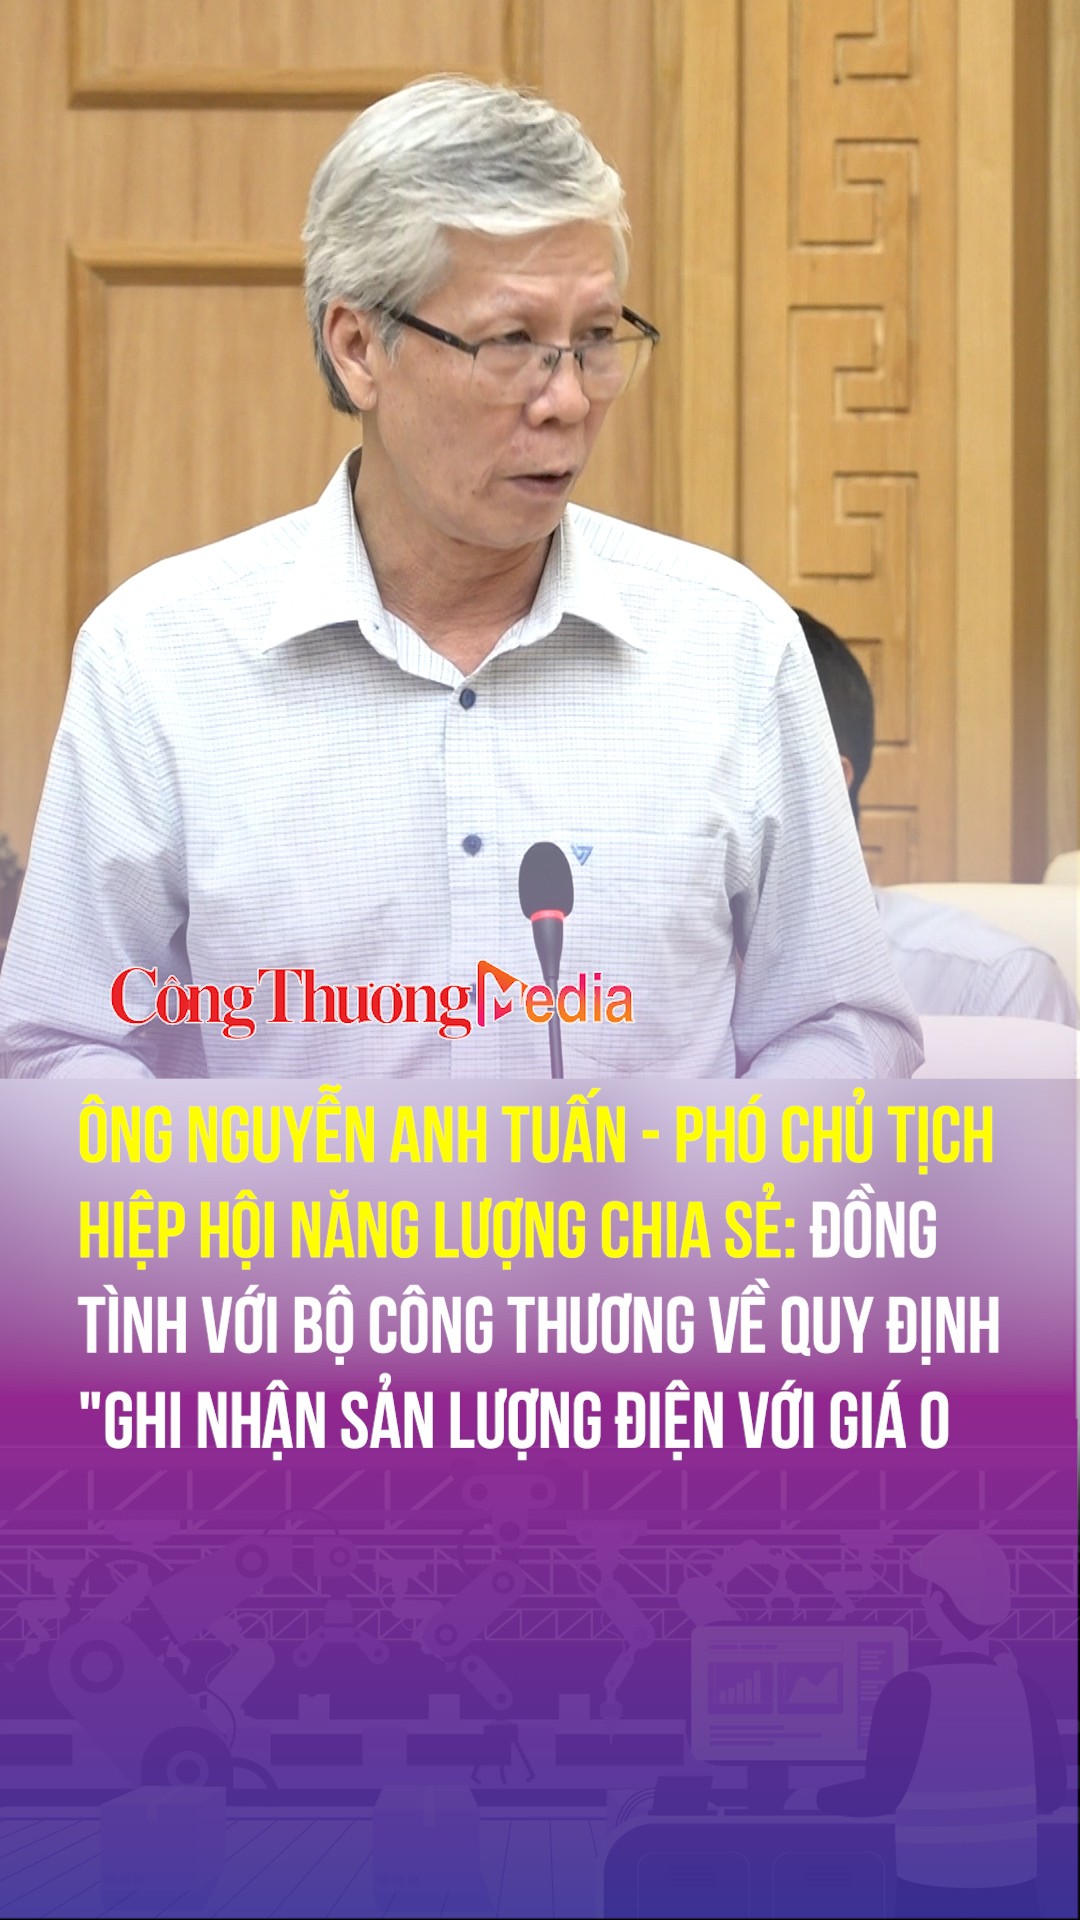 ong nguyen anh tuan dong tinh voi bo cong thuong ve quy dinh ghi nhan san luong dien voi gia 0 dong